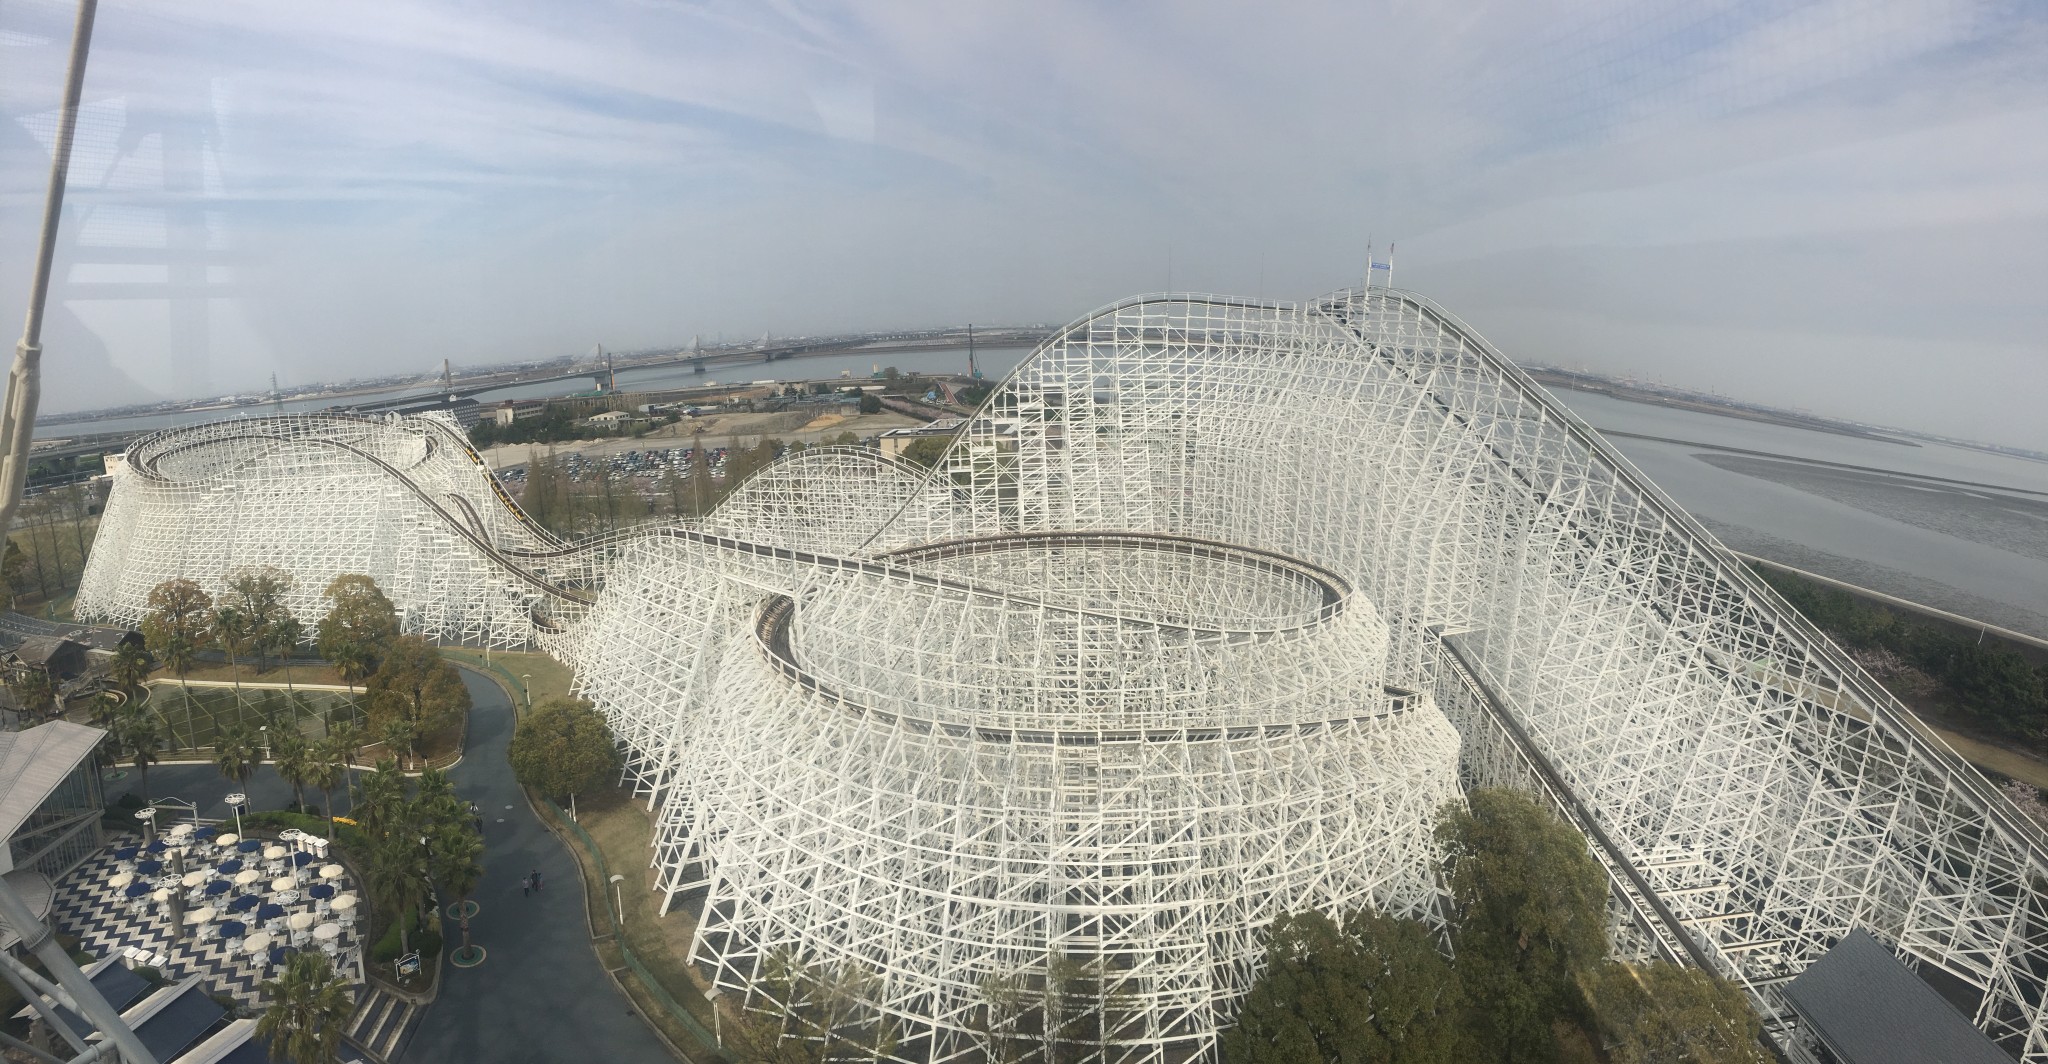 White Cyclone, A Legendary Wooden Roller Coaster in Japan